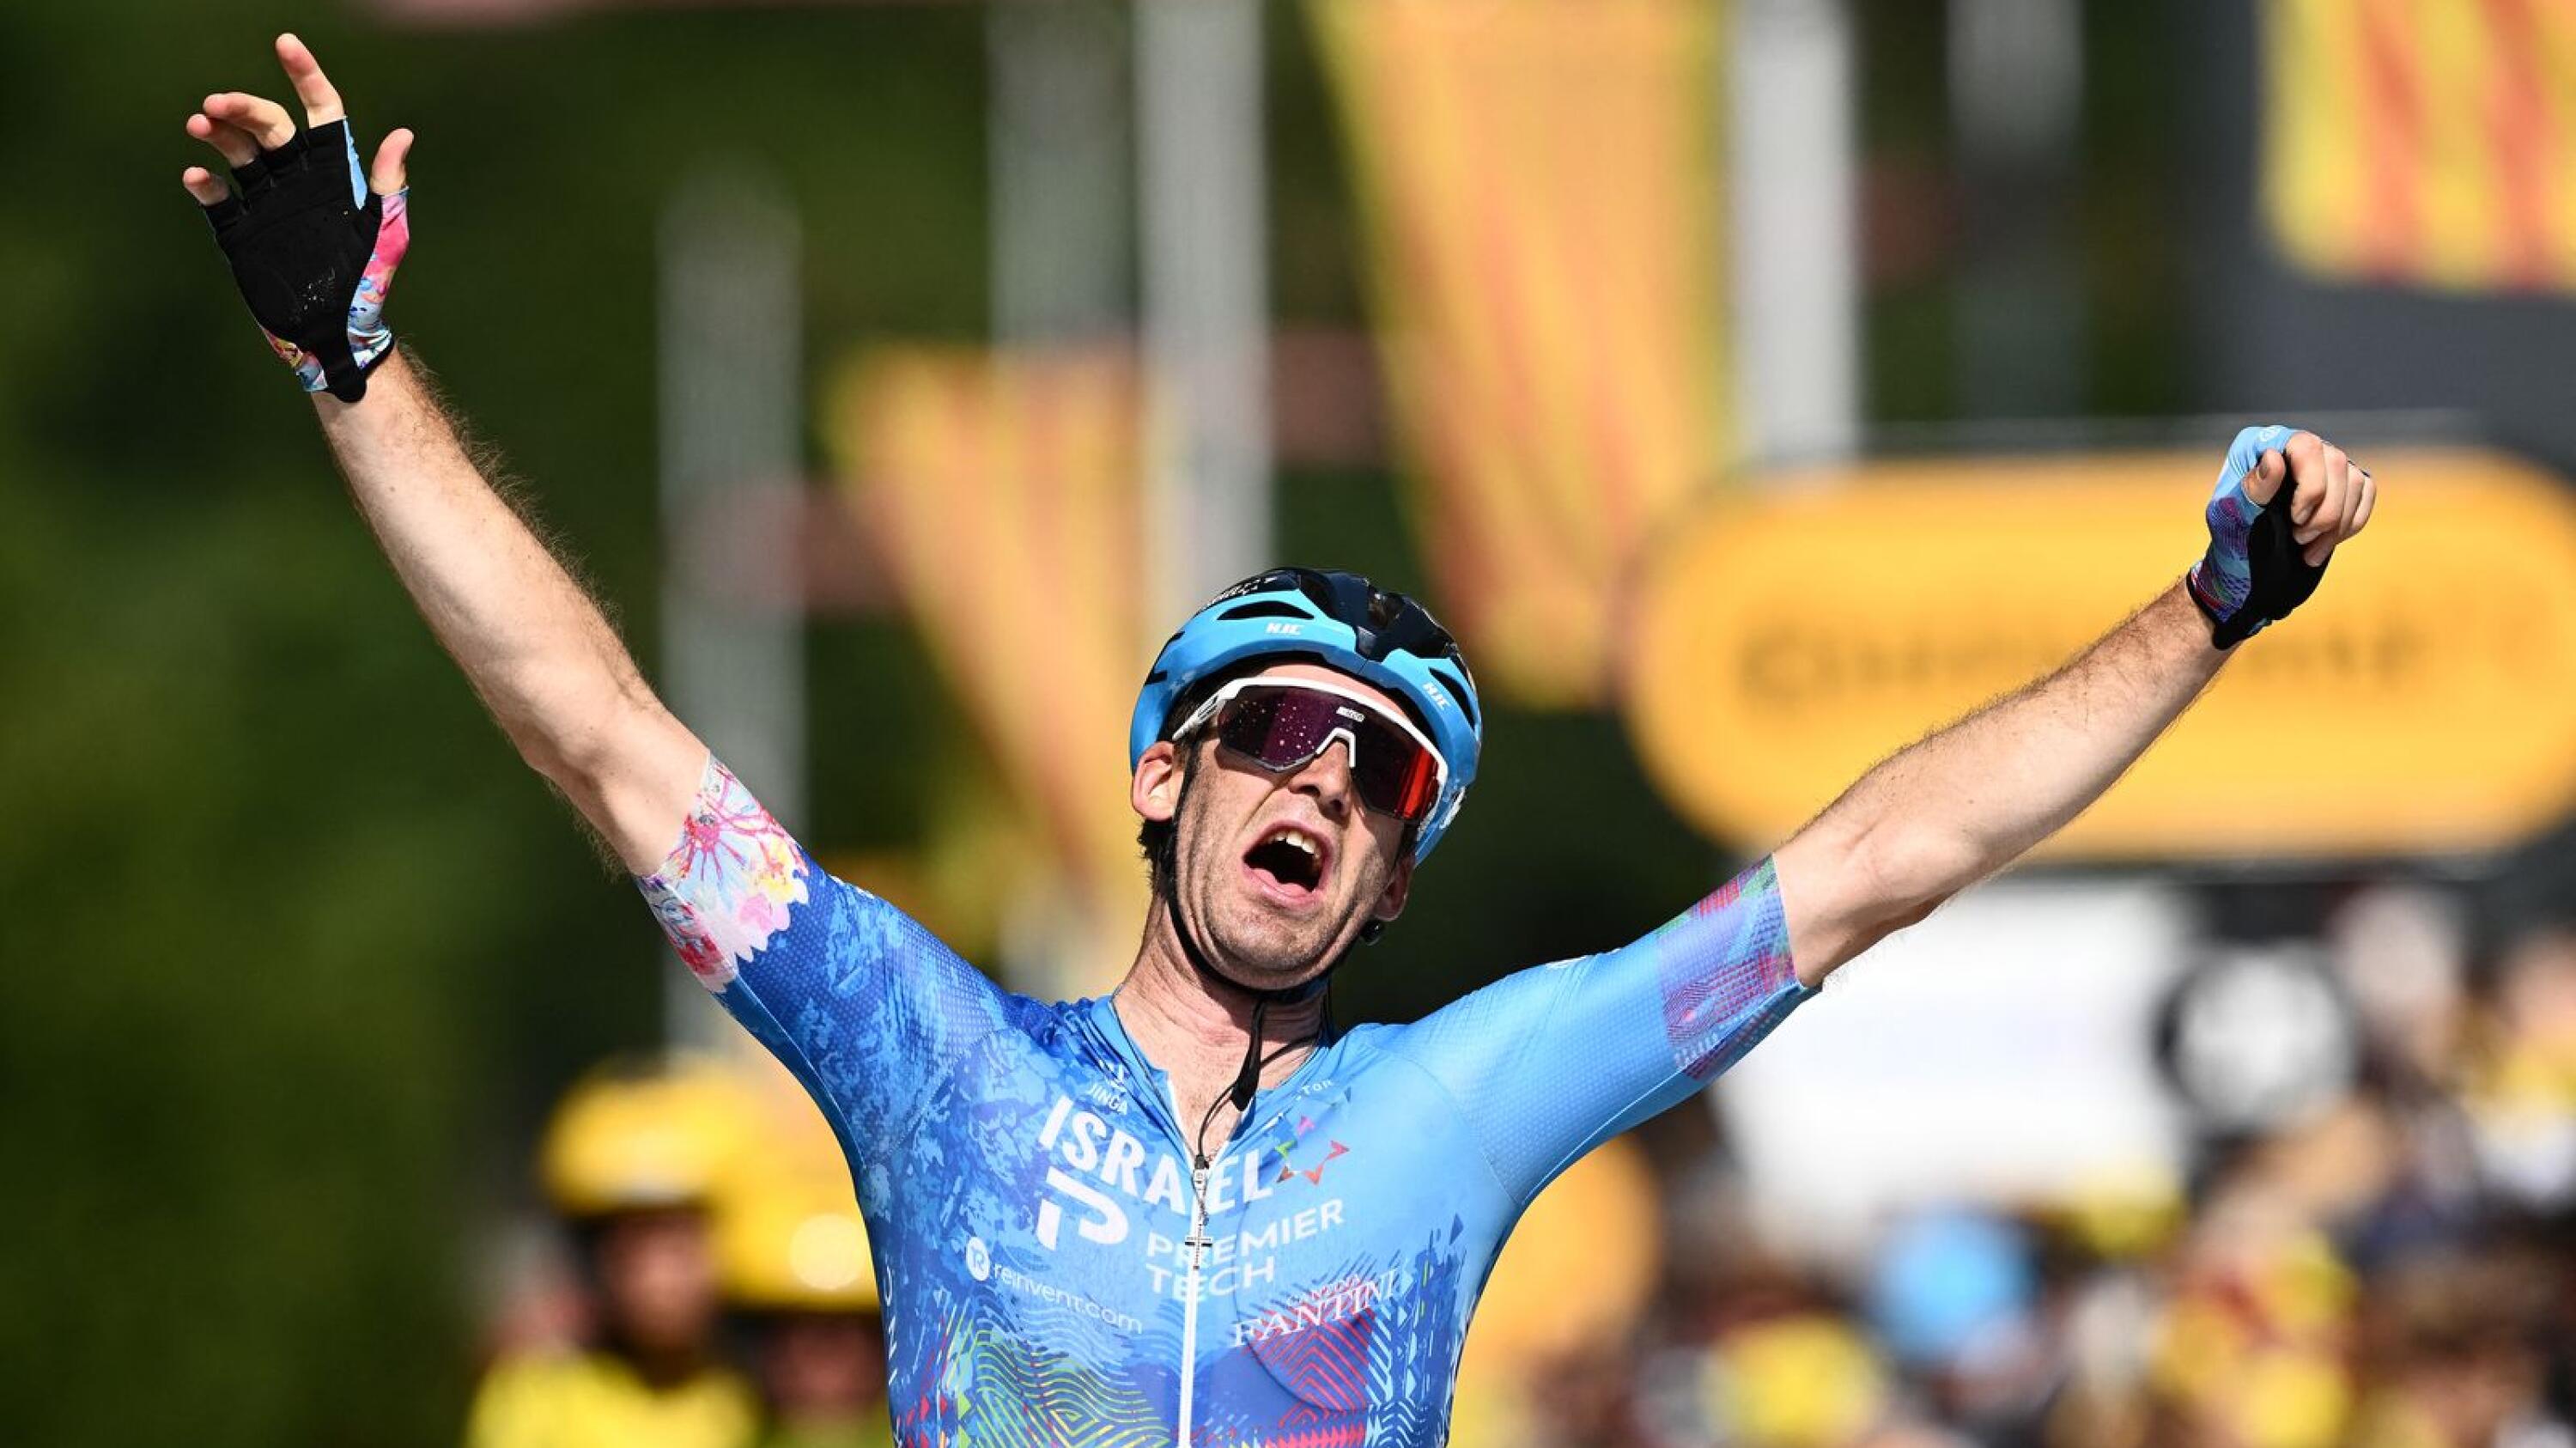 Israel-Premier Tech team's Canadian rider Hugo Houle celebrates as he cycles to the finish line to win the 16th stage of the 109th edition of the Tour de France cycling race, 178,5 km between Carcassonne and Foix in southern France, on Tuesday